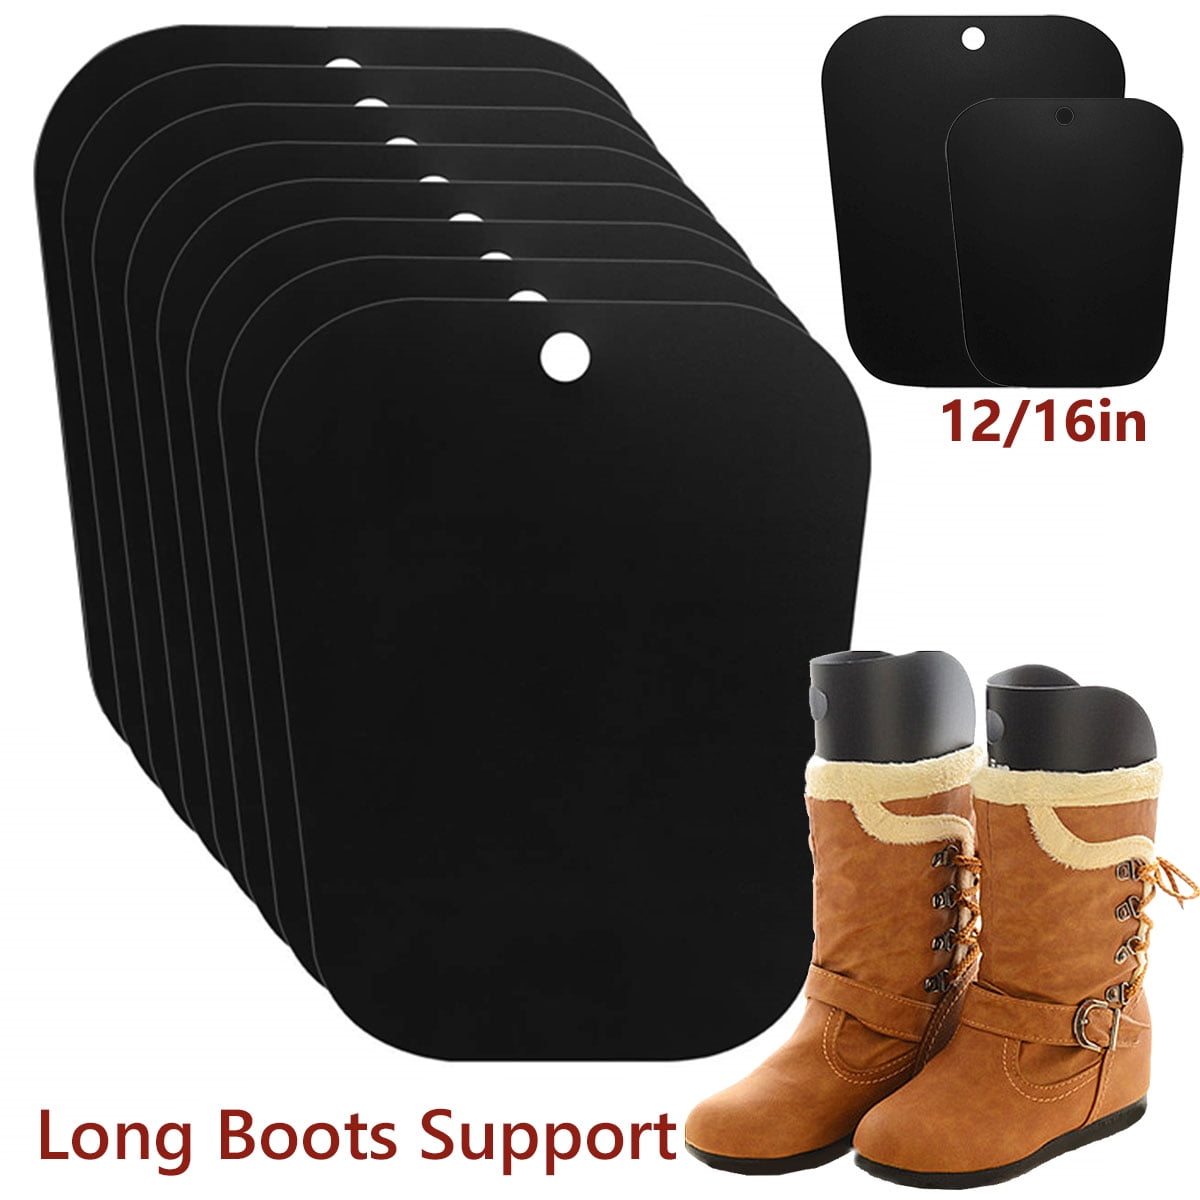 6 inches Black PVC Boots Stand Holder High Boot Inserts Support Automatic Stand Support Shaper Shoe Trees Tall Short Boot Shaper Inserts Pad 6 in-20 in 8 Pairs Boot Shaper Inserts 